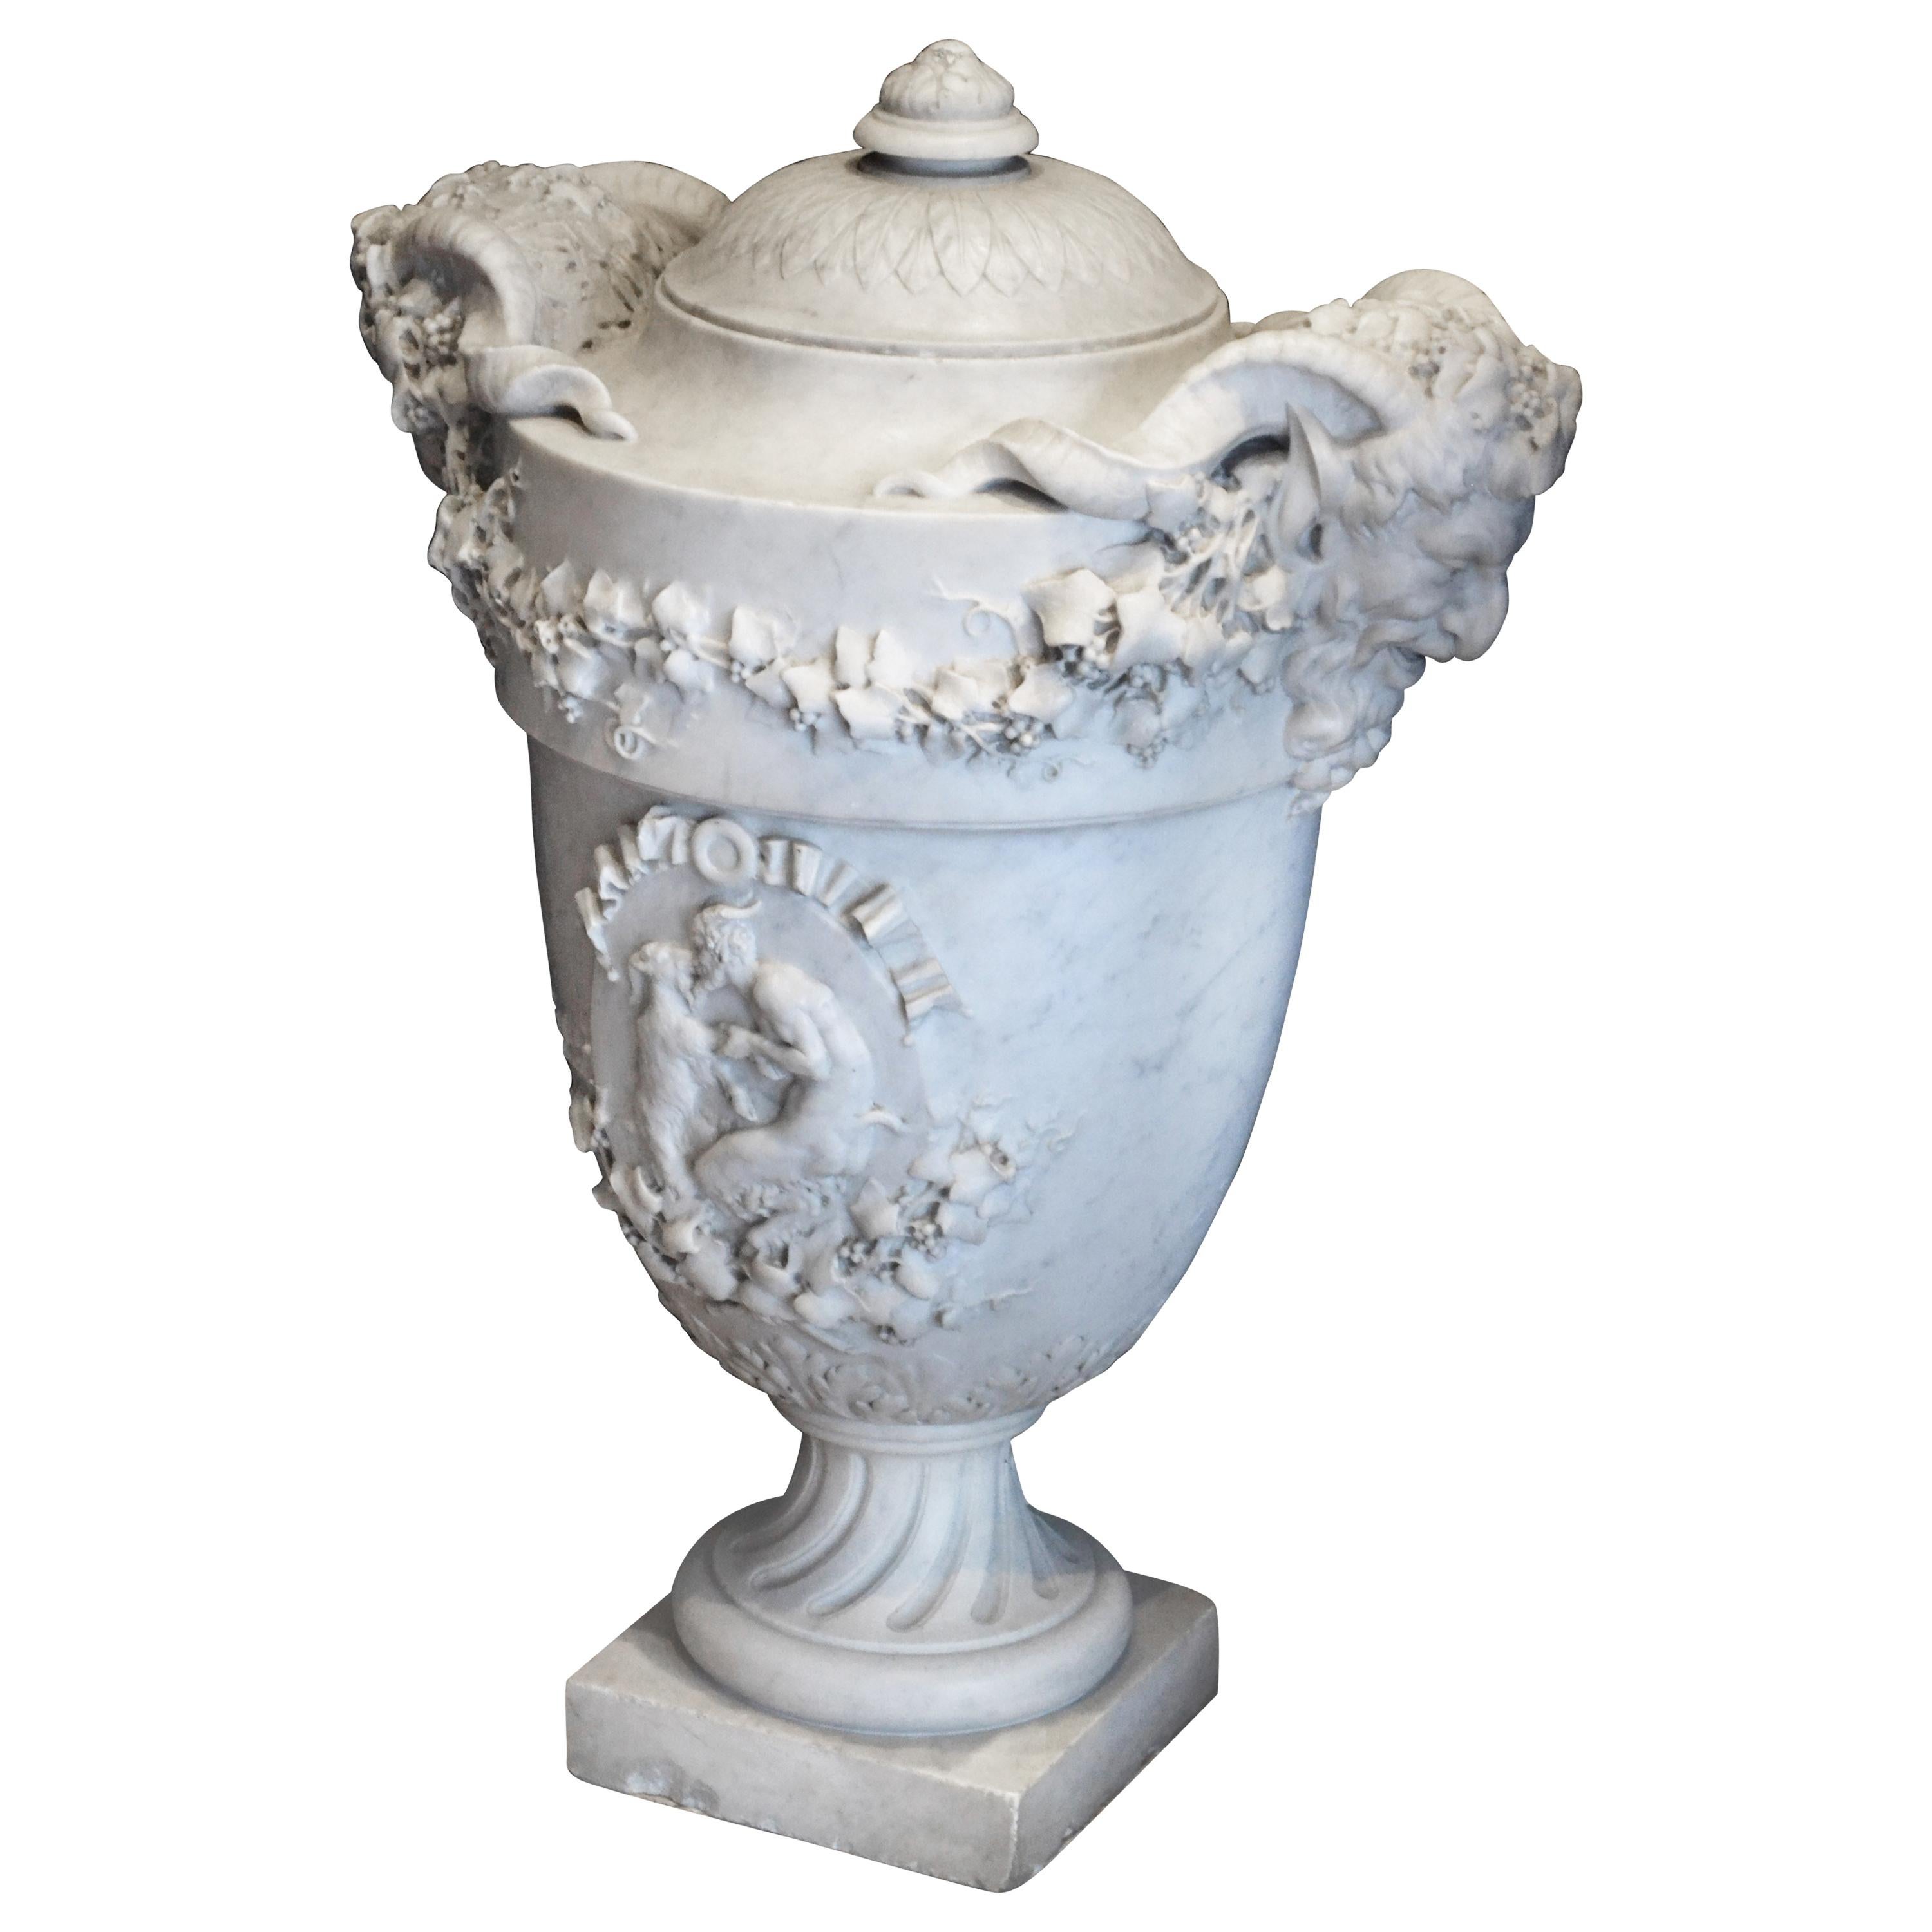 19th Century Lidded Compana Urn Hand Carved in Carrara Marble